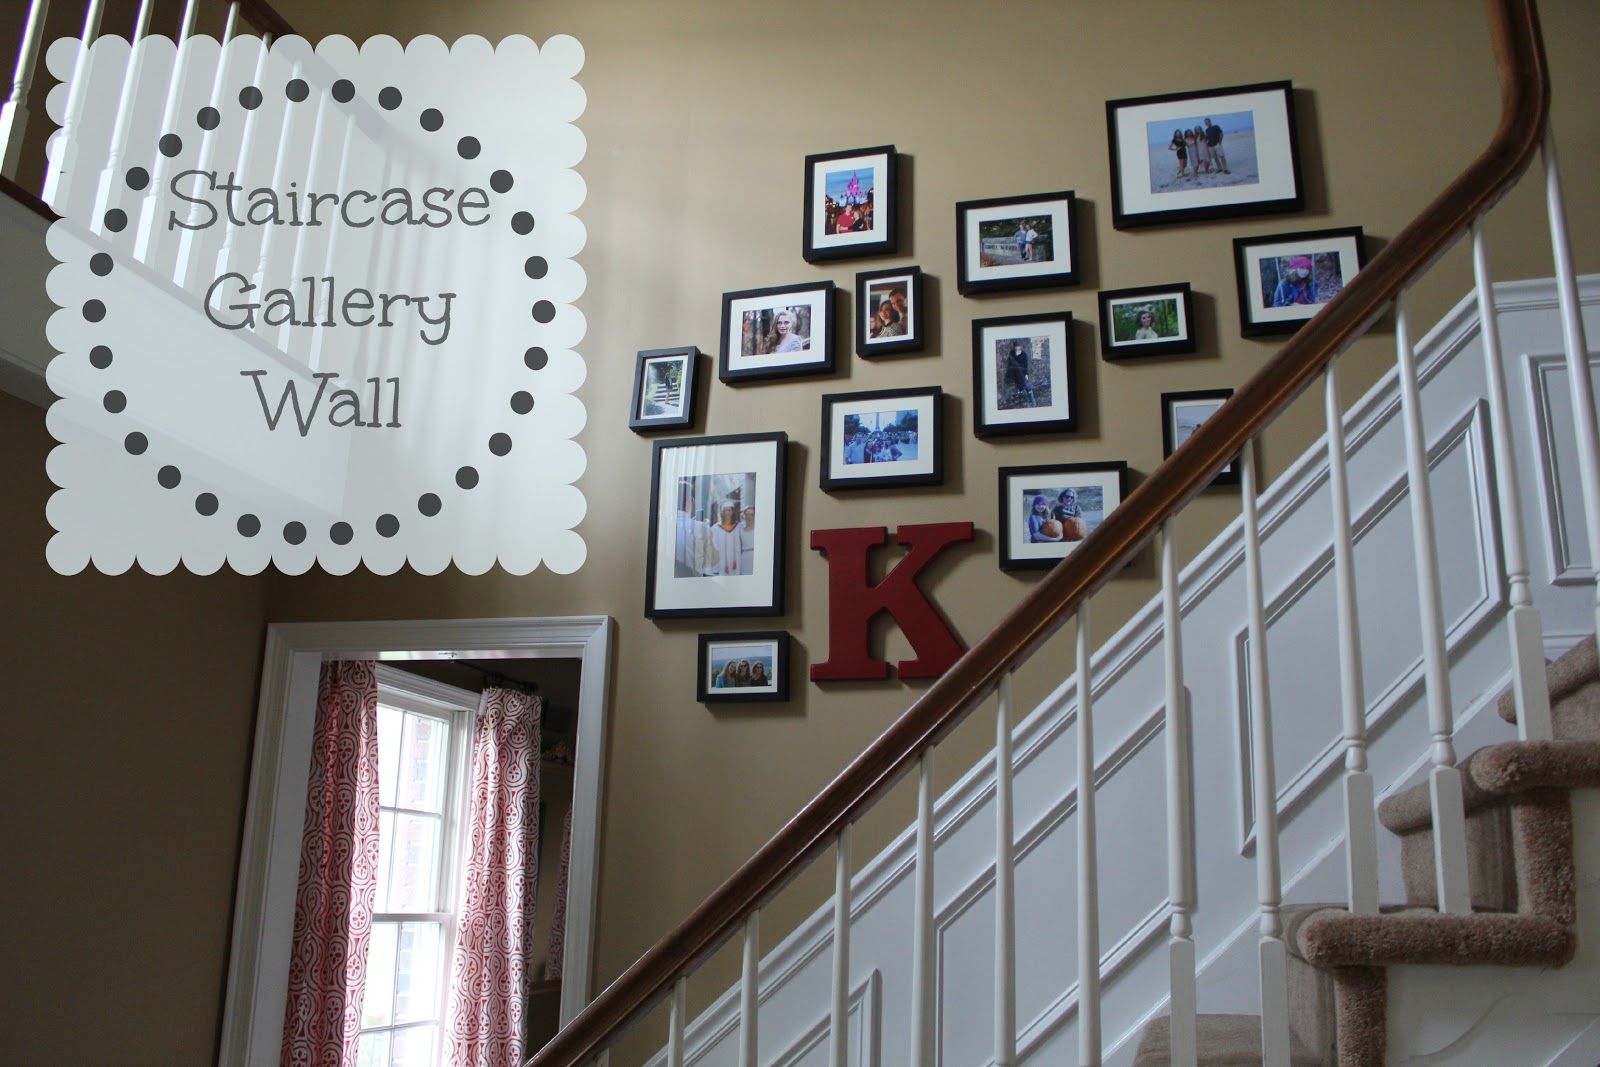 our life in a click: Staircase Gallery Wall